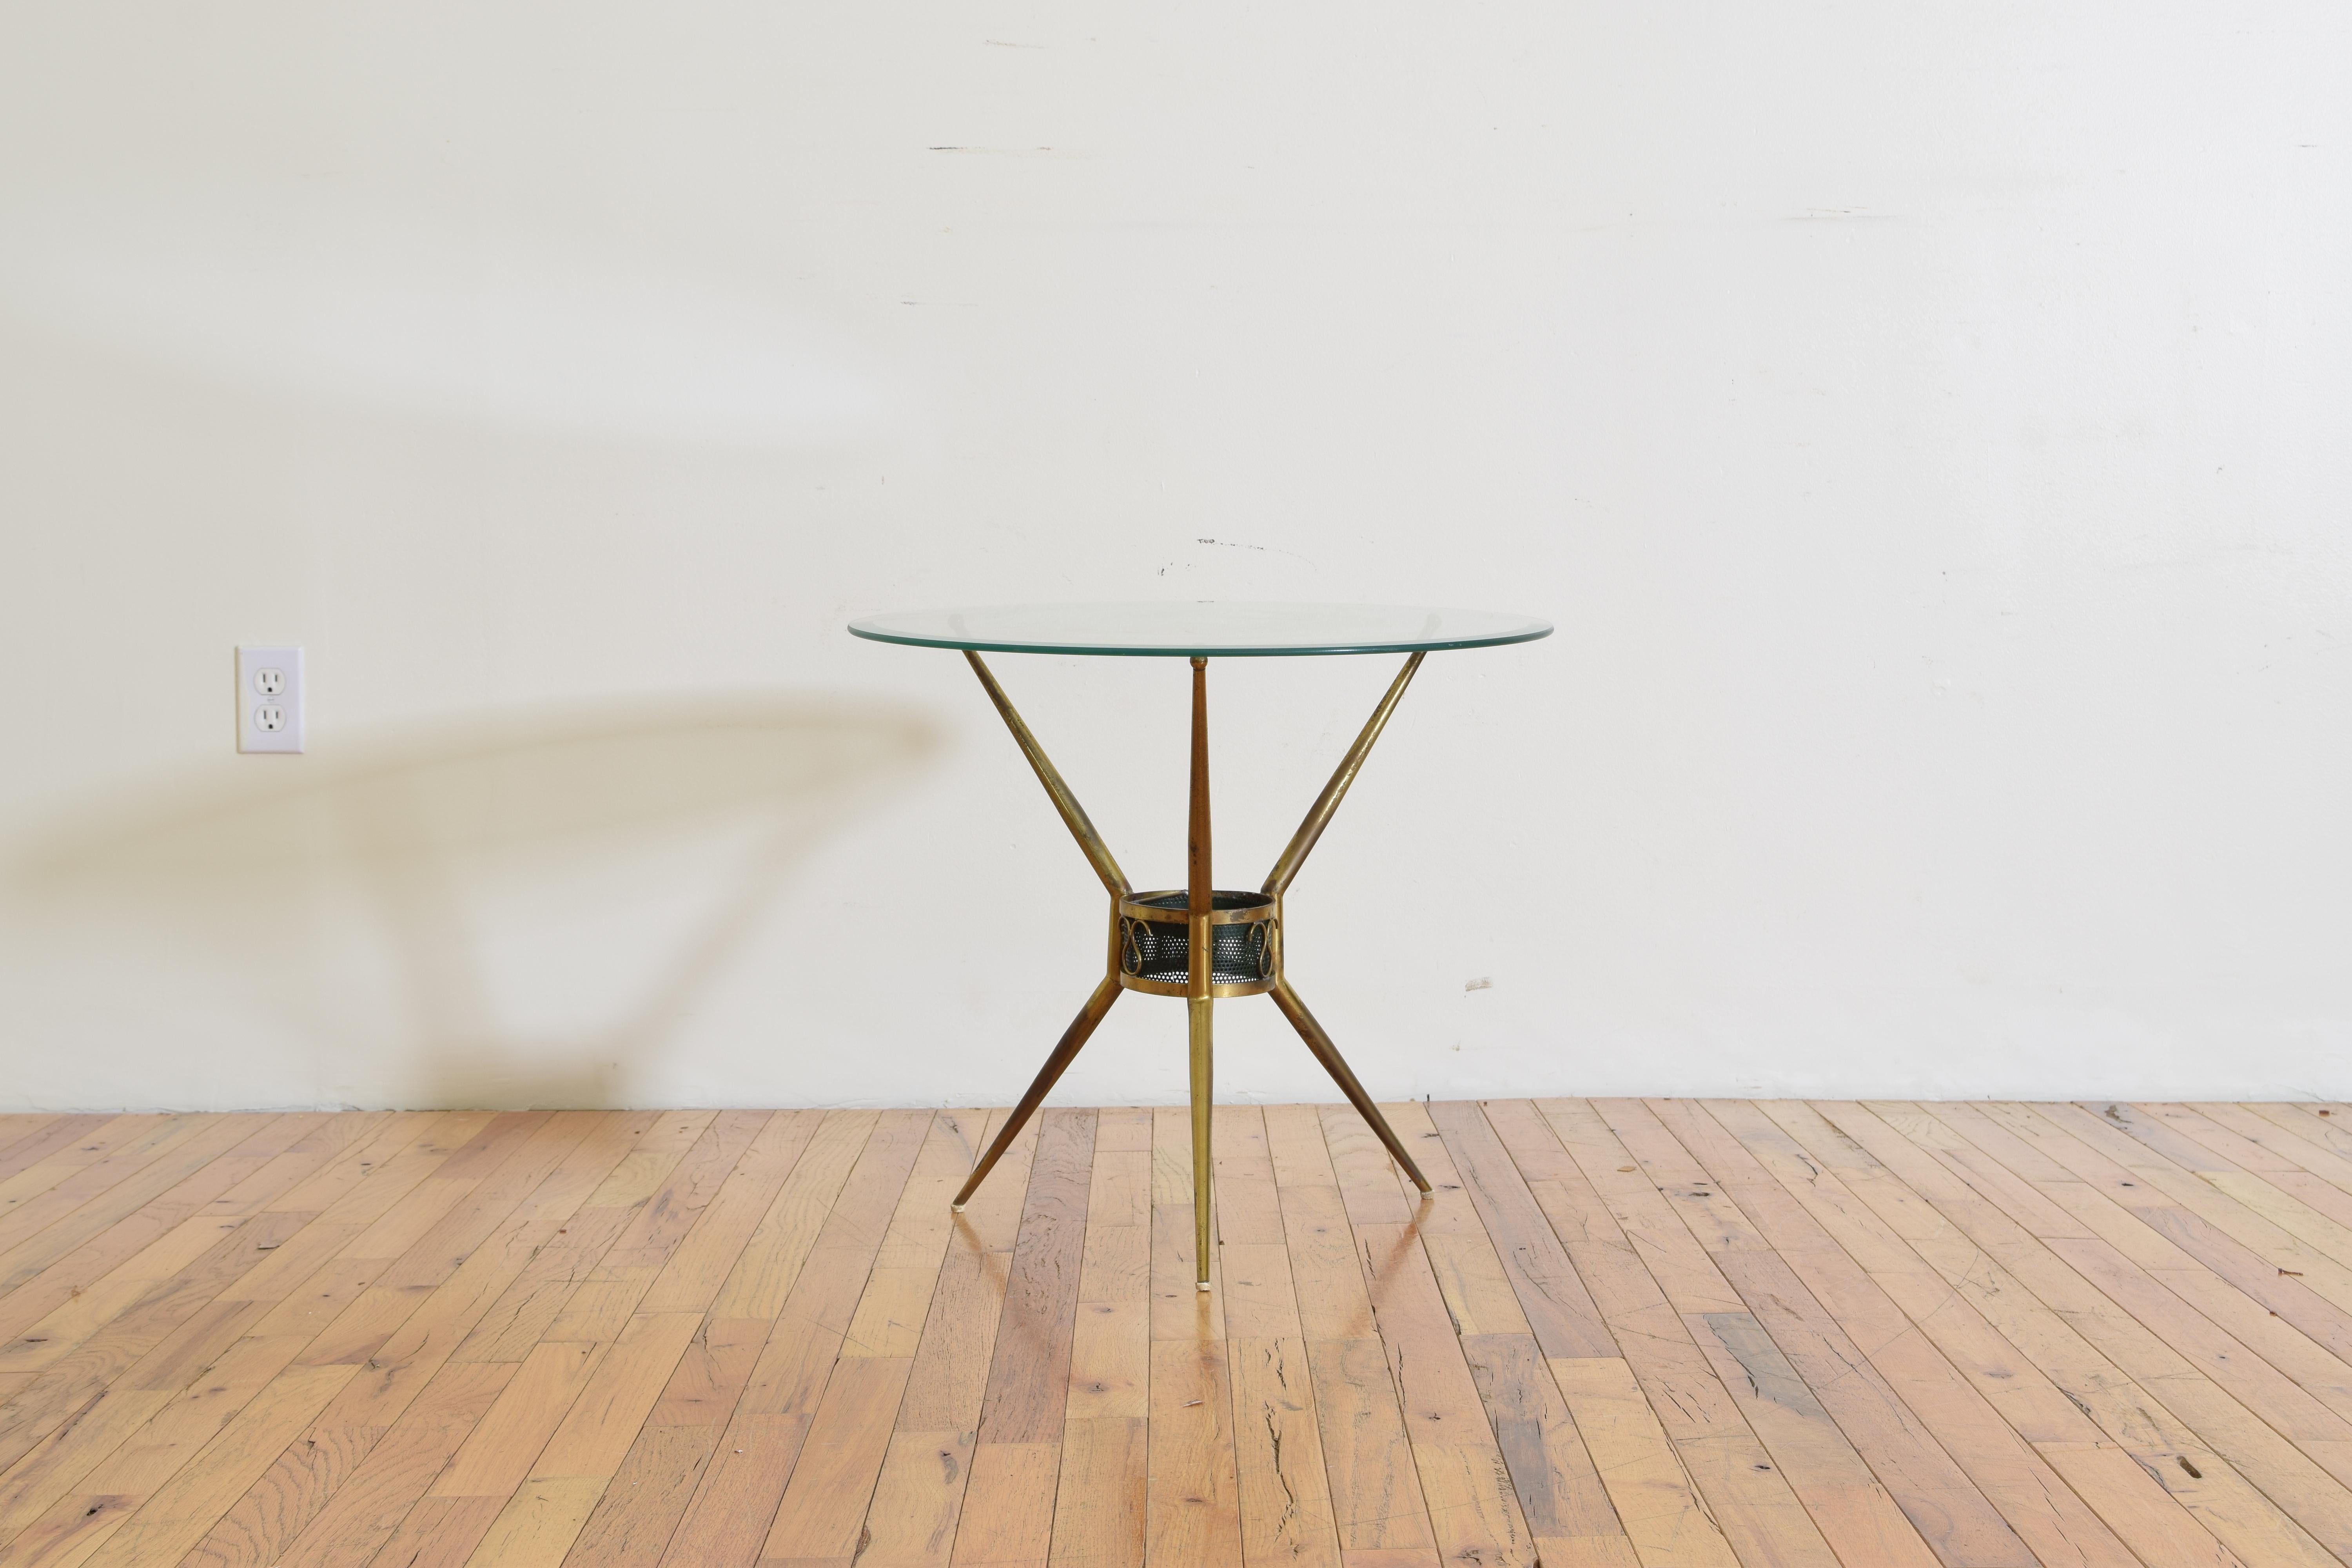 The circular top with beveled edge atop a tripartite base with a central metal ring.